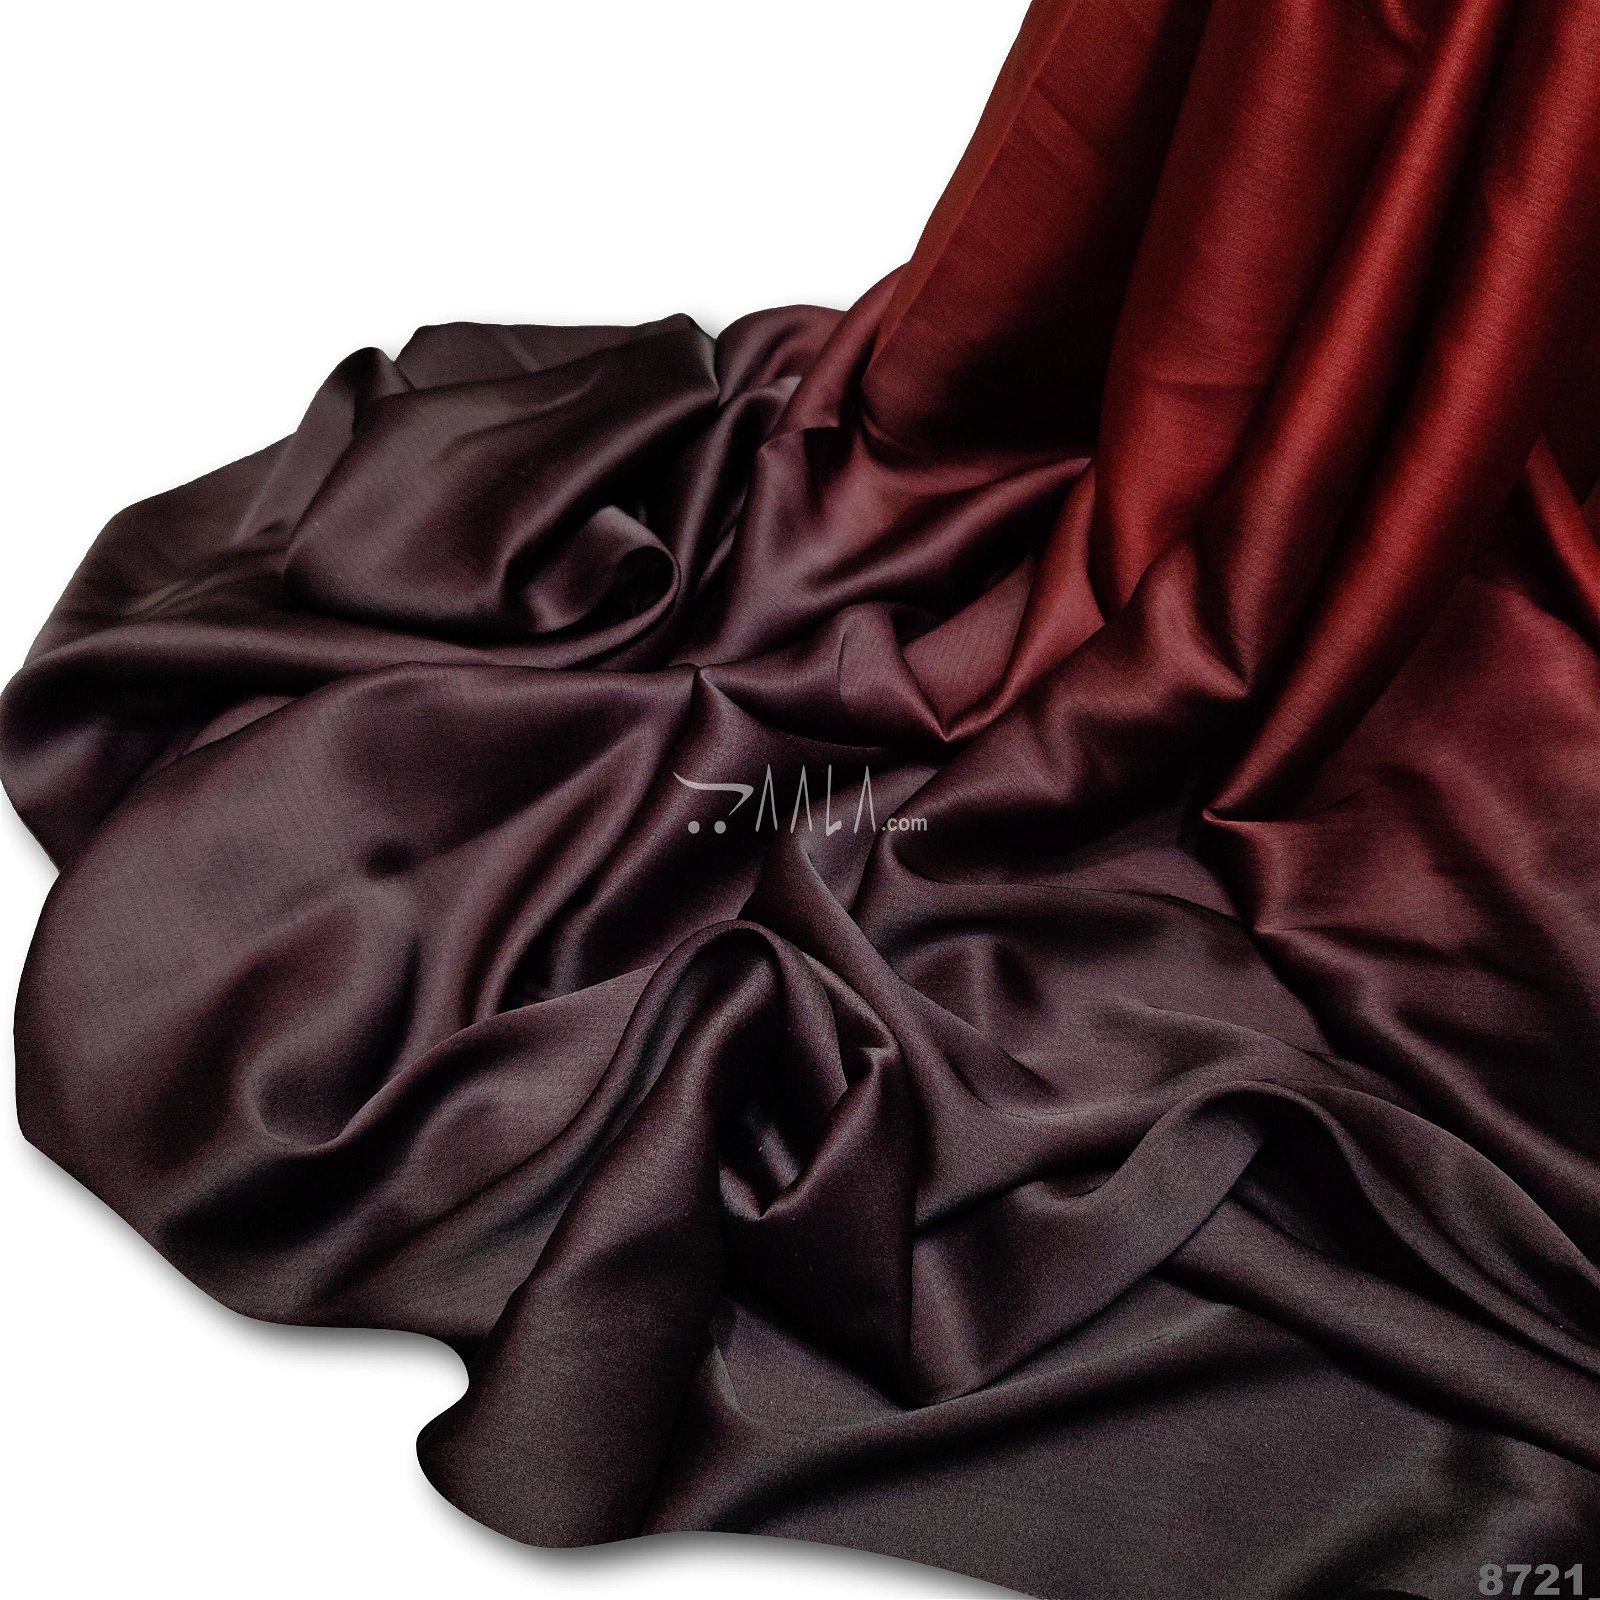 Shaded Satin-Chiffon Poly-ester 44-Inches ASSORTED Per-Metre #8721